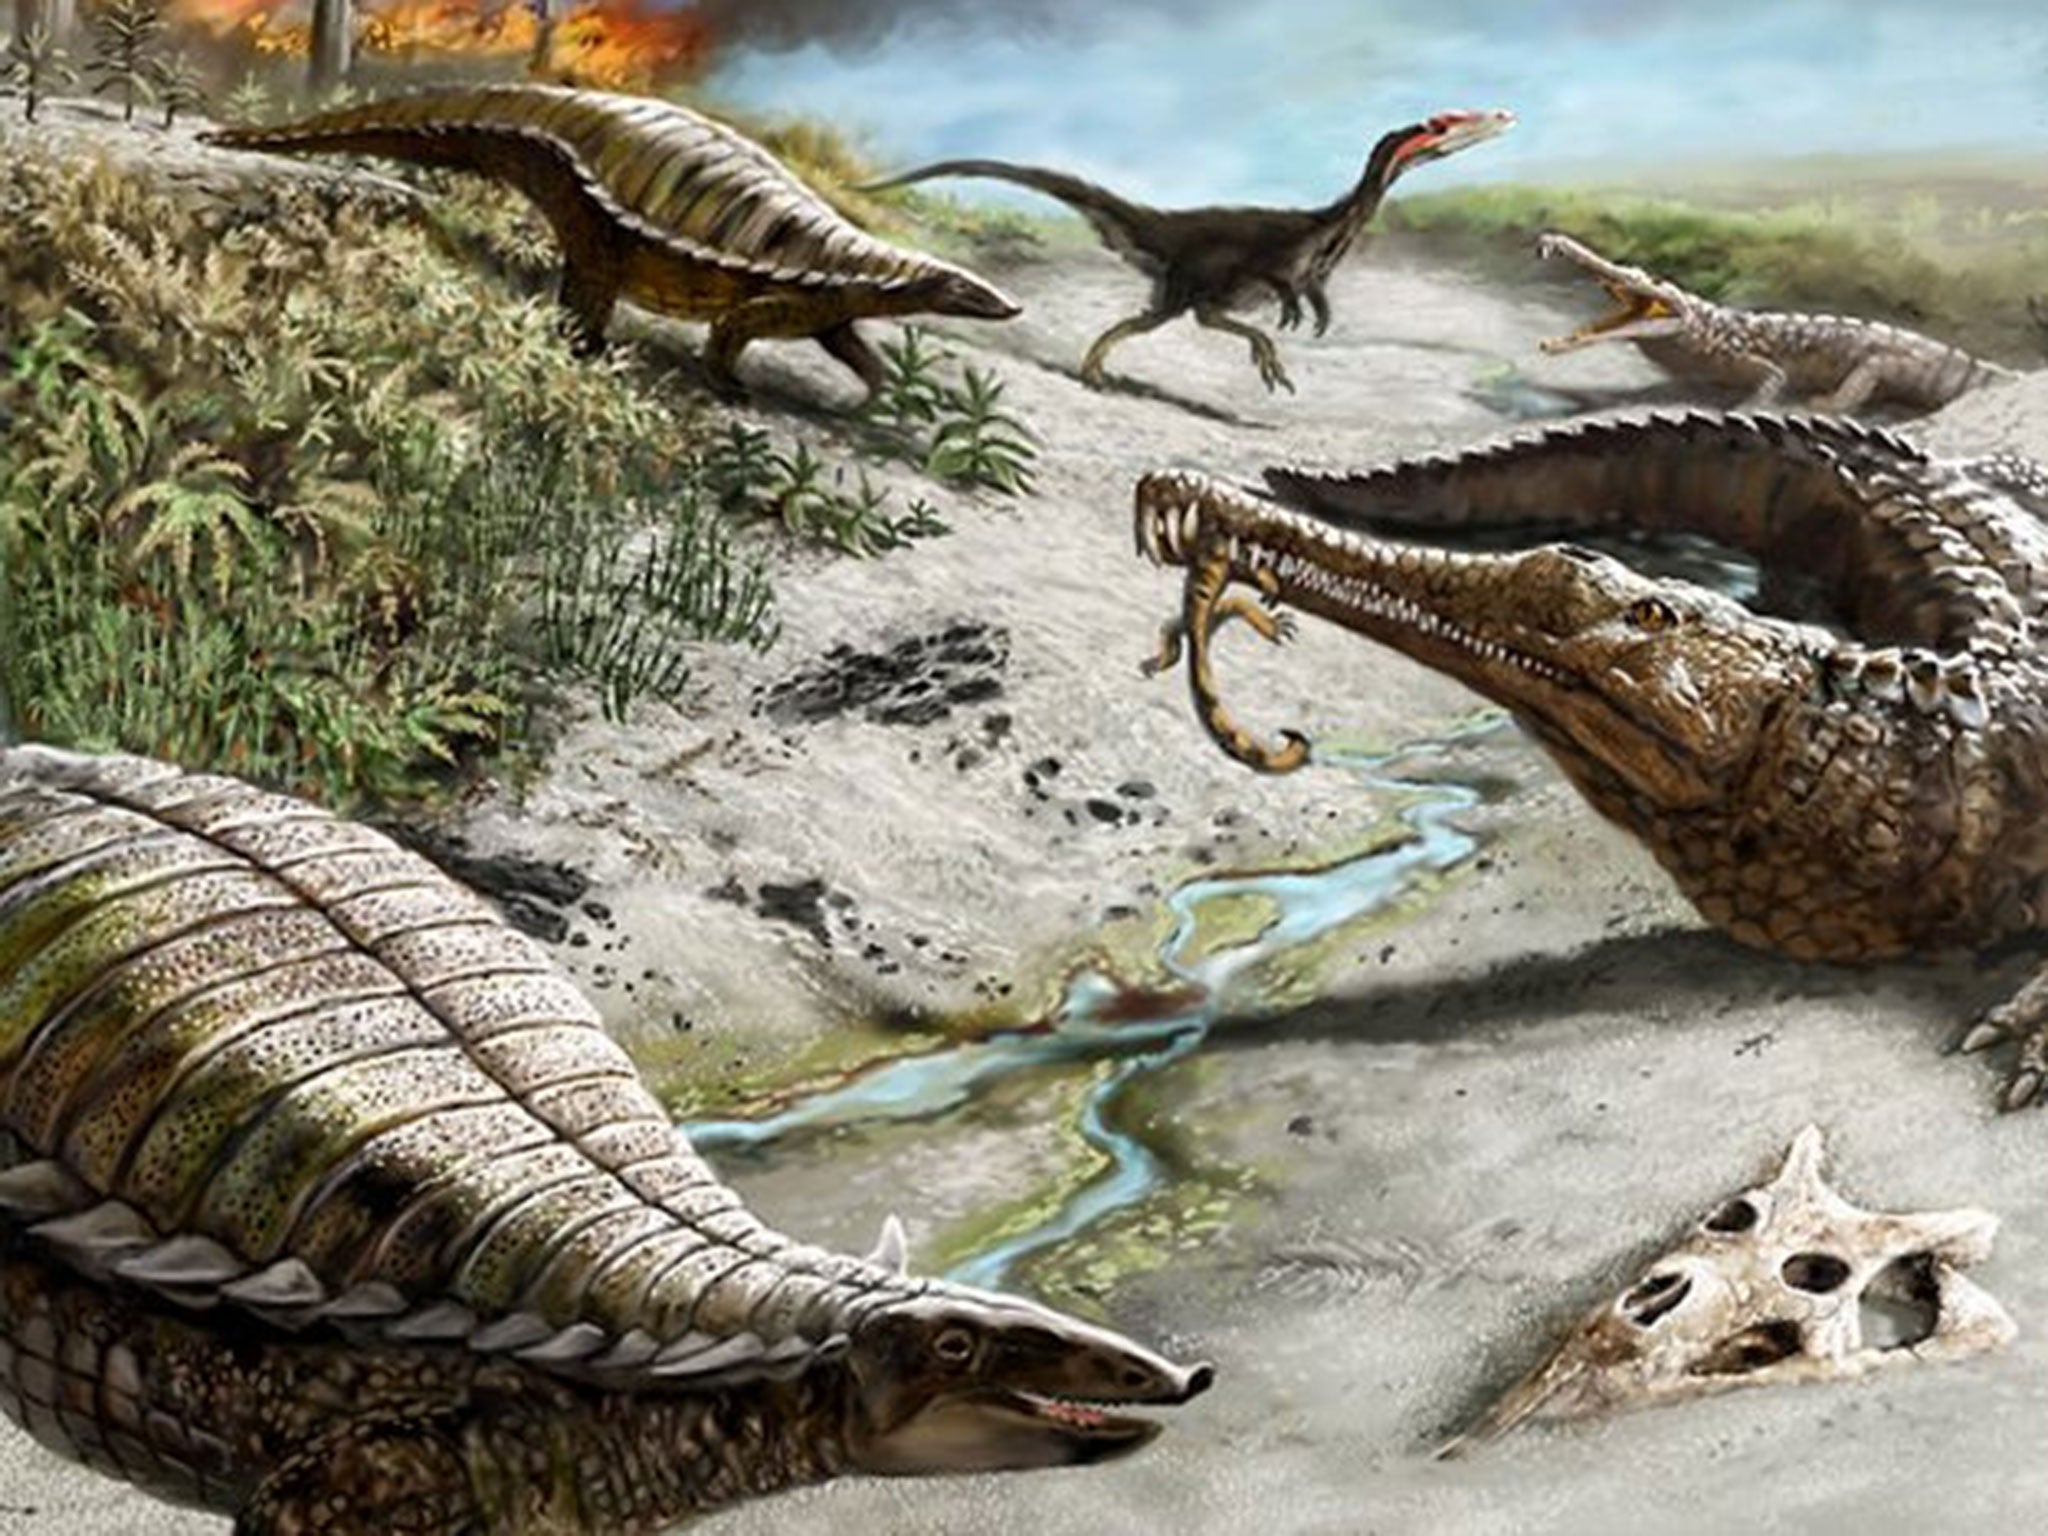 An artist's impression of dinosaurs that lived 200 million years ago, as they have given scientists a dramatic glimpse of what may be in store for the world if greenhouse gas emissions are not held back.